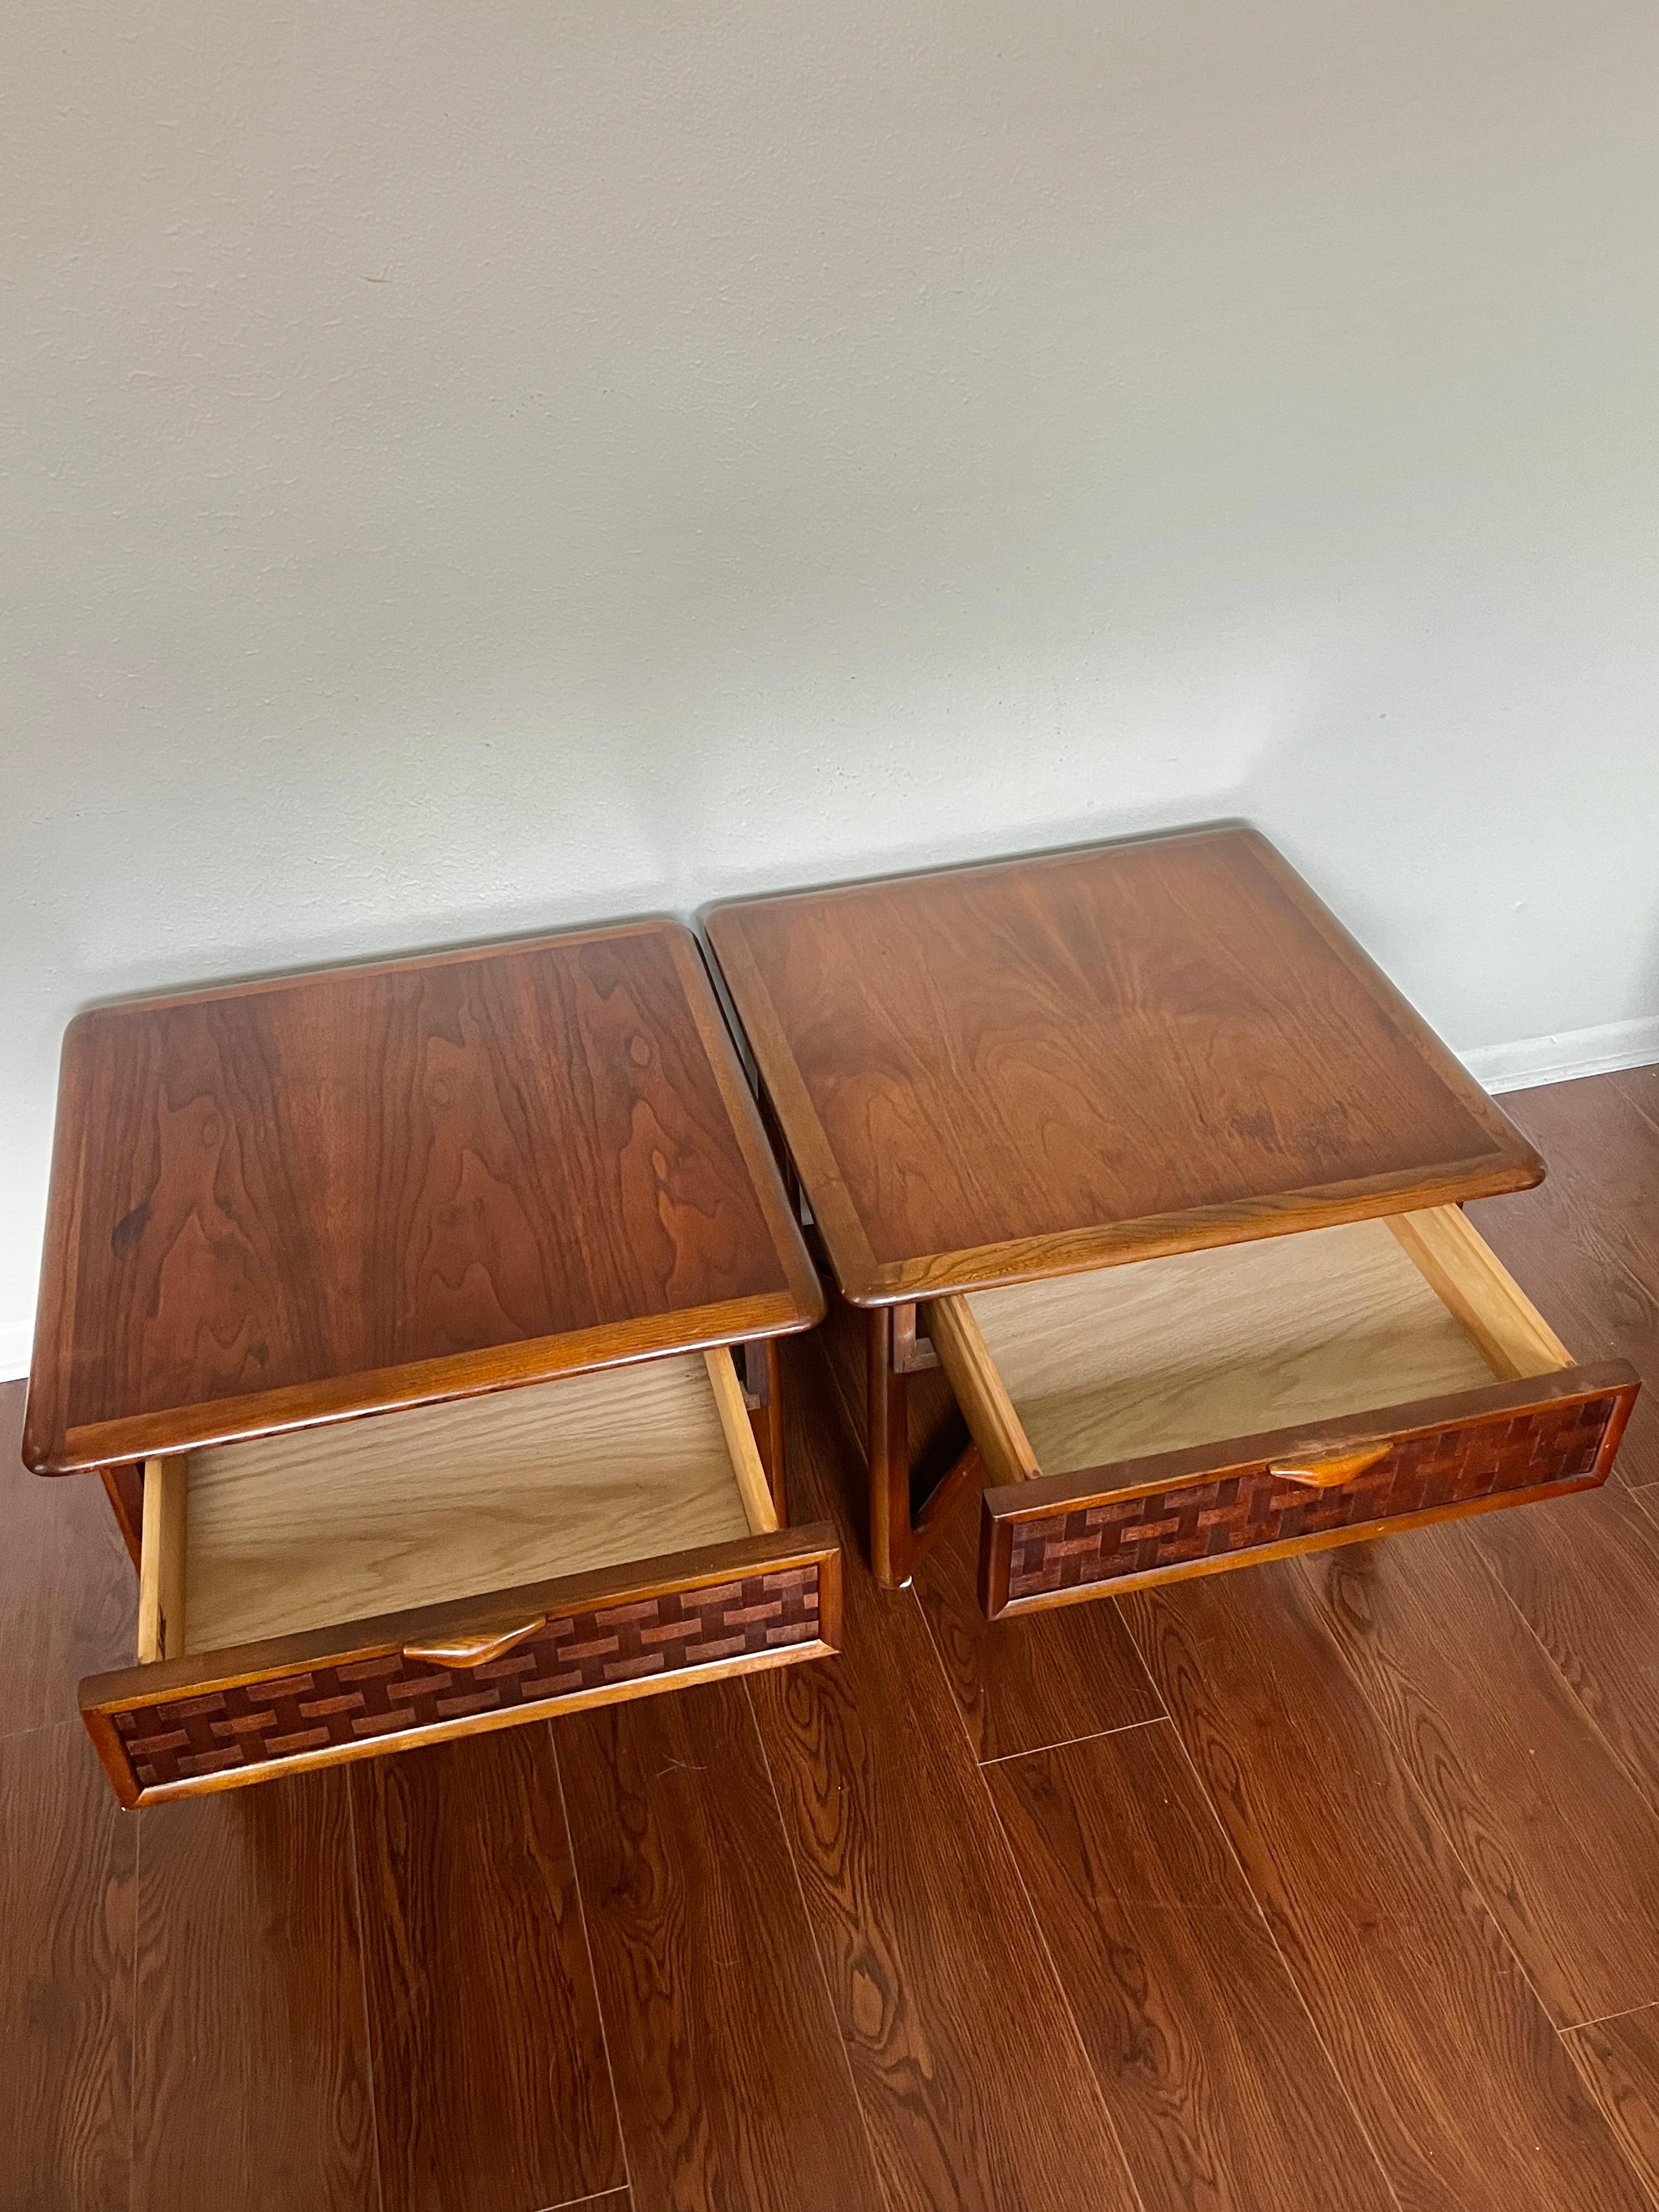 Pair of Mid-Century Modern Lane Perception Side Tables with a Cross Cross Base 4